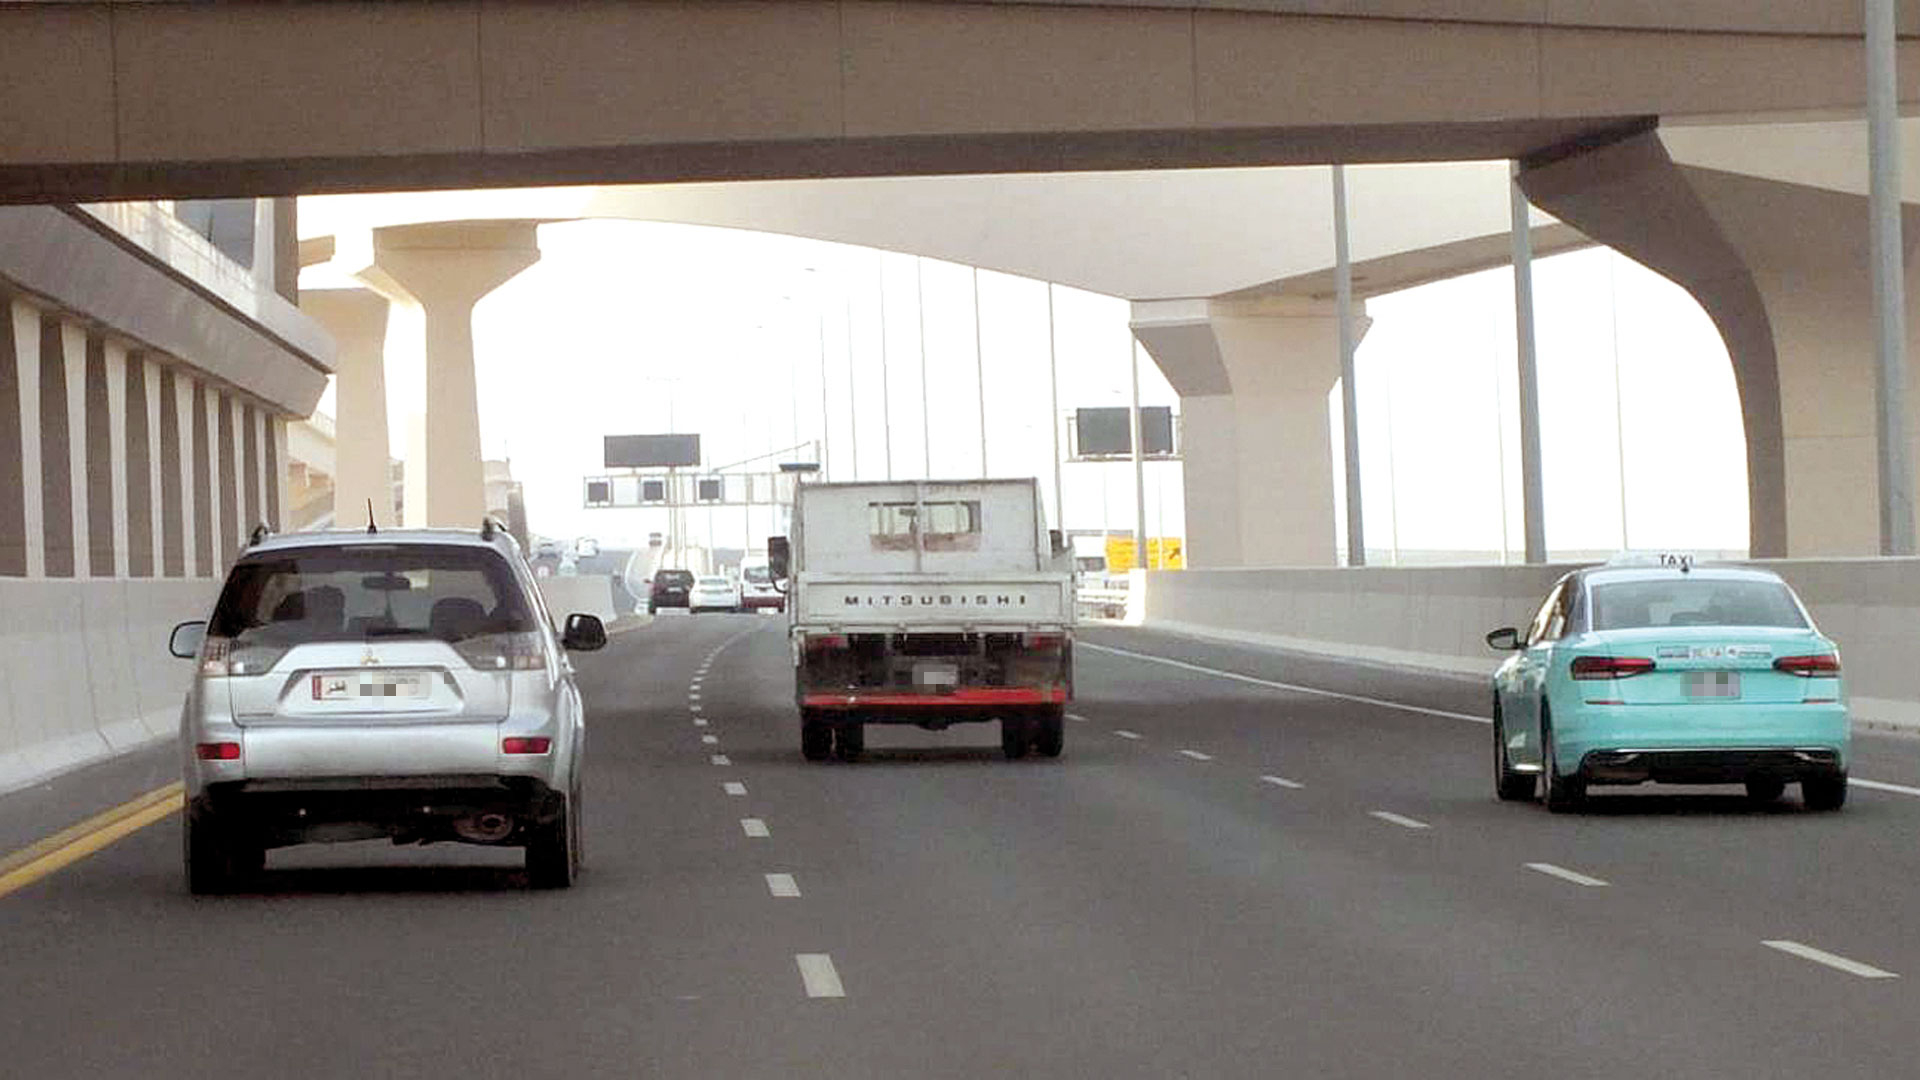 Demands to compel transport vehicles to use the right lane